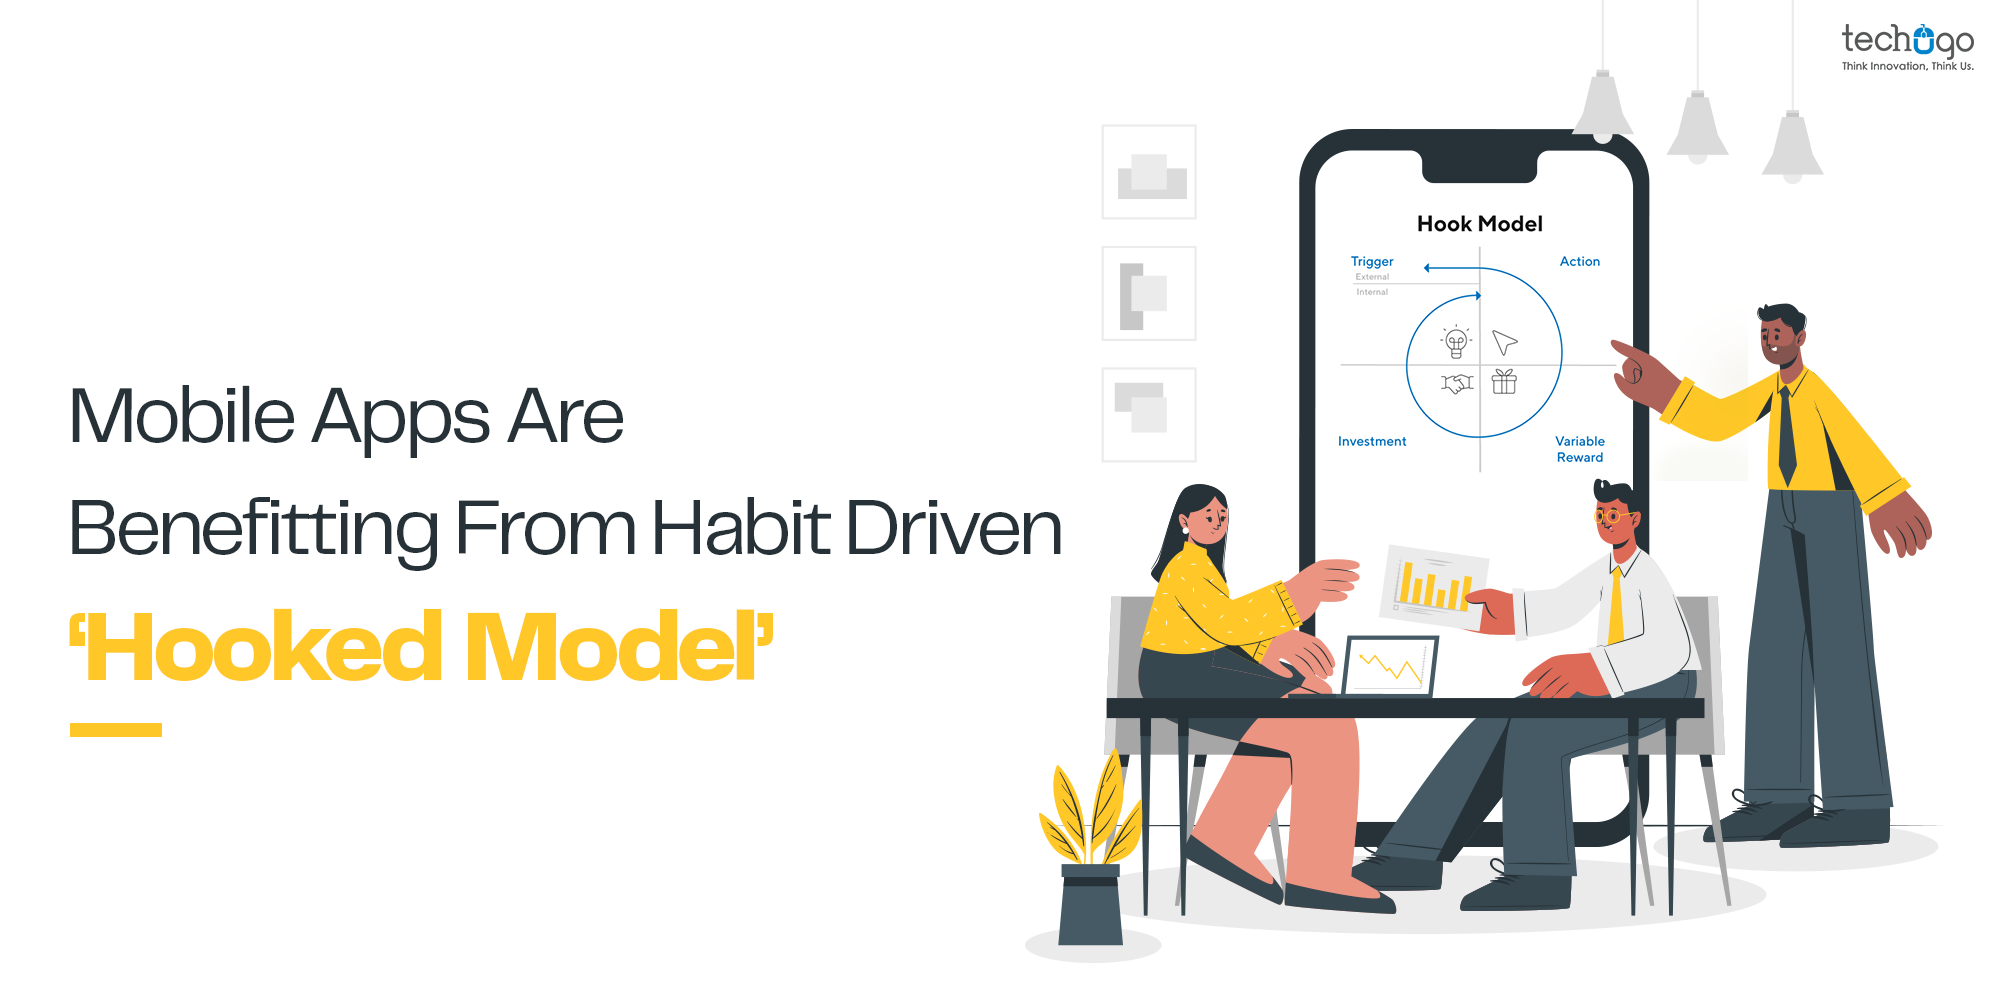 MOBILE APPS ARE BENEFITTING FROM HABIT DRIVEN ‘HOOKED MODEL’